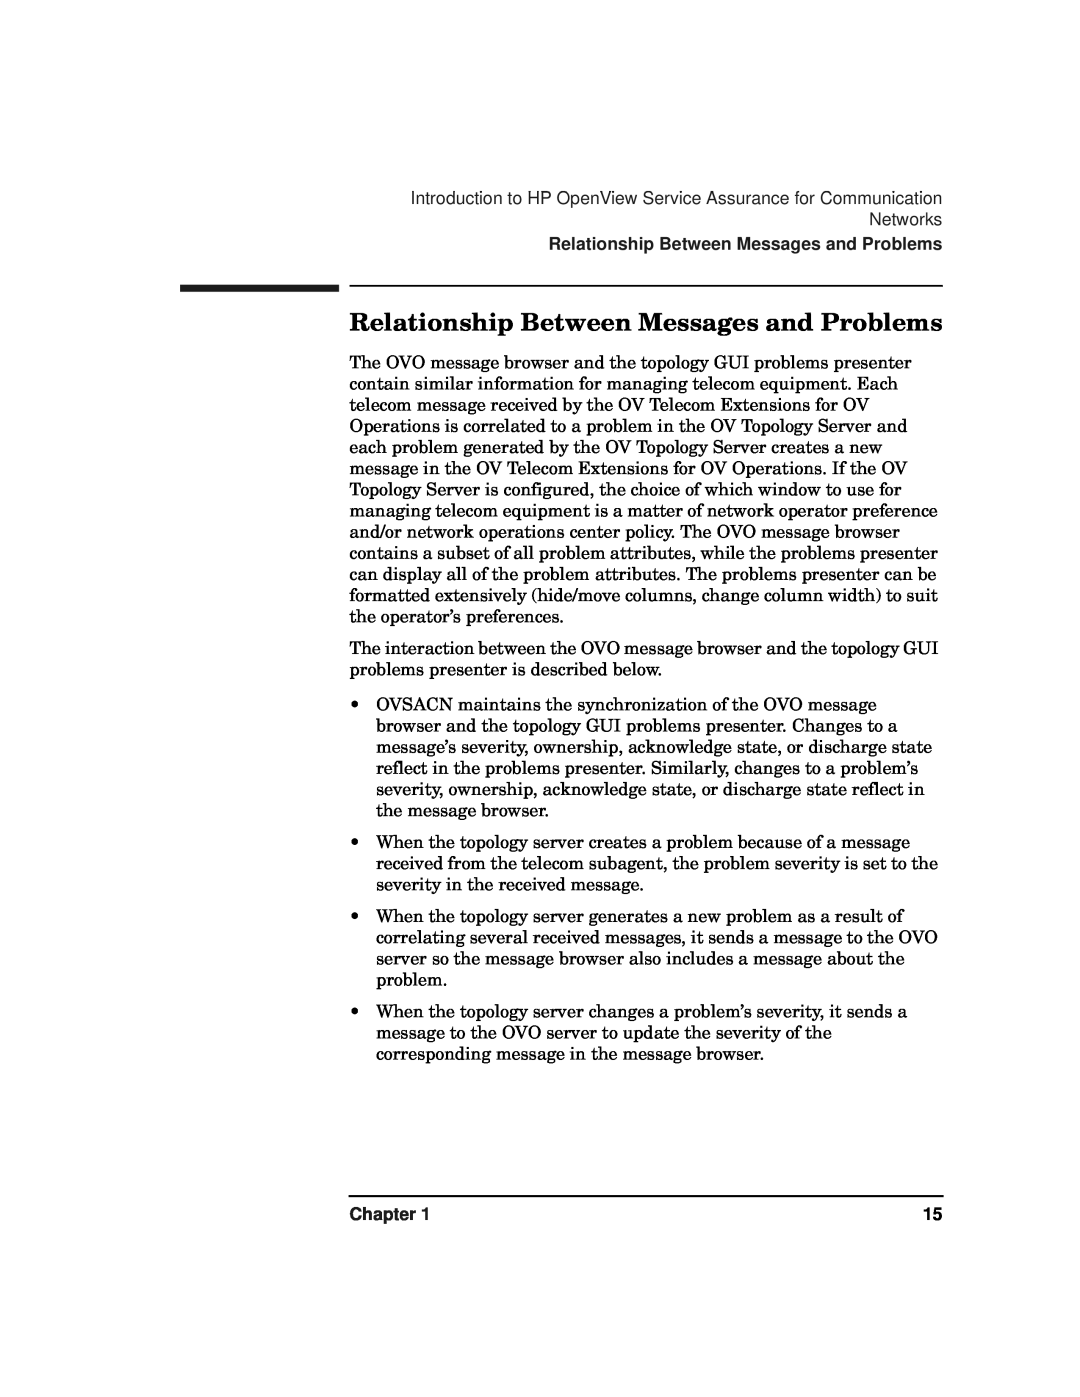 HP OPENVIEW J5119-90007 manual Relationship Between Messages and Problems, Chapter 